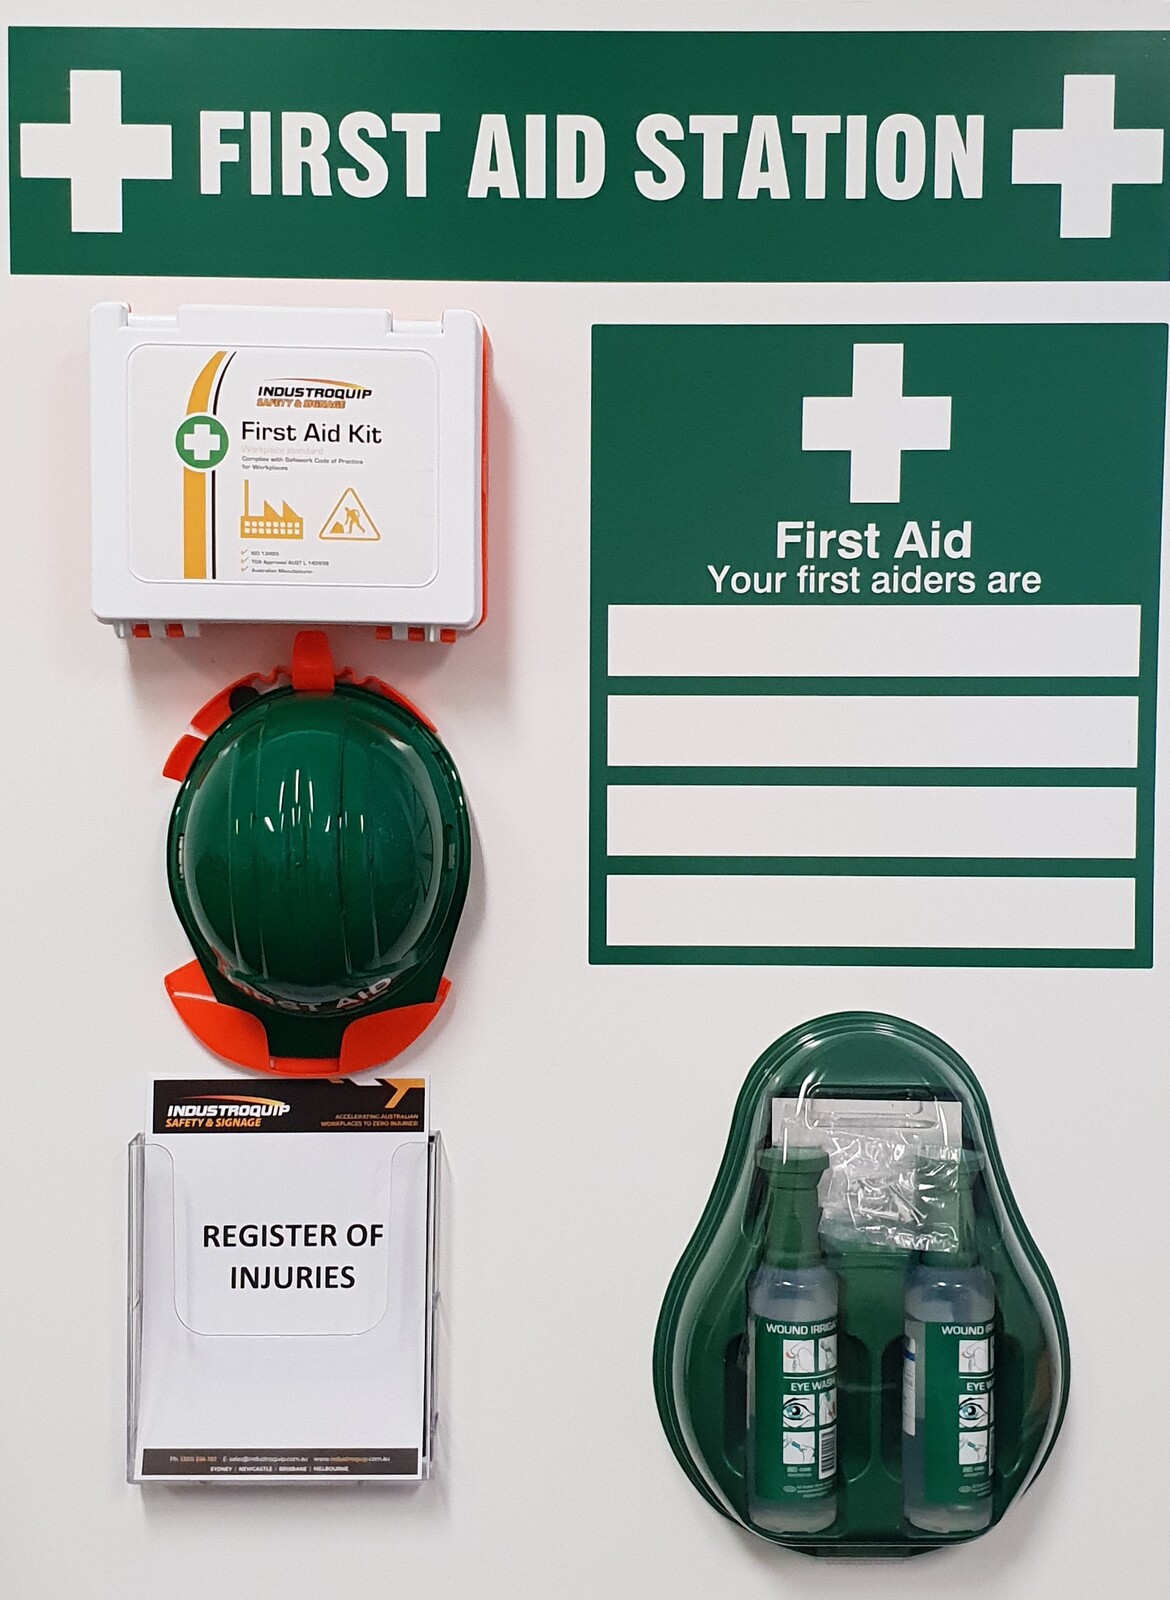 First Aid Station - Industroquip